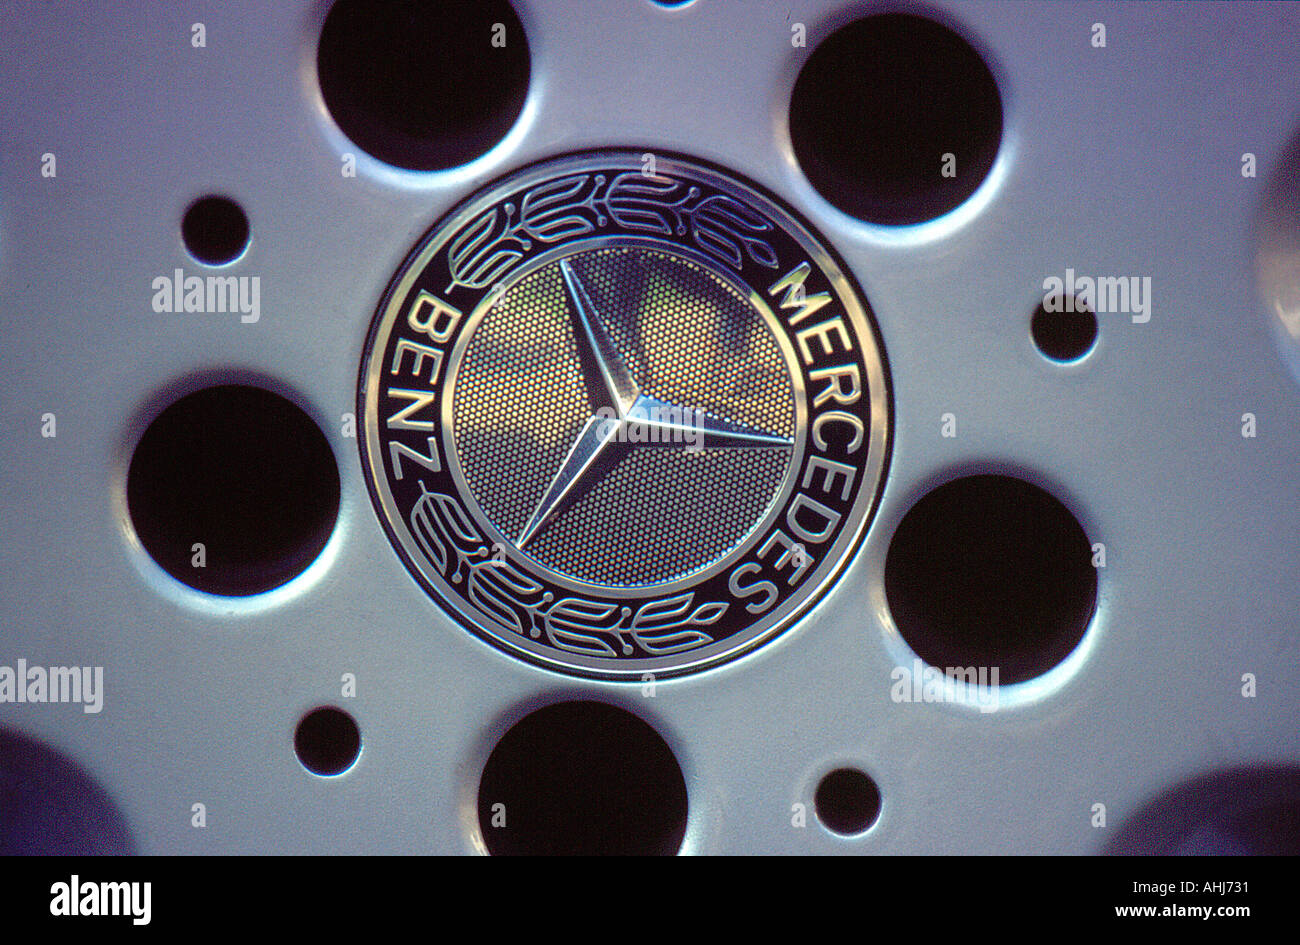 rim and logo of a Mercedes Benz Germany Europe. Photo by Willy Matheisl Stock Photo